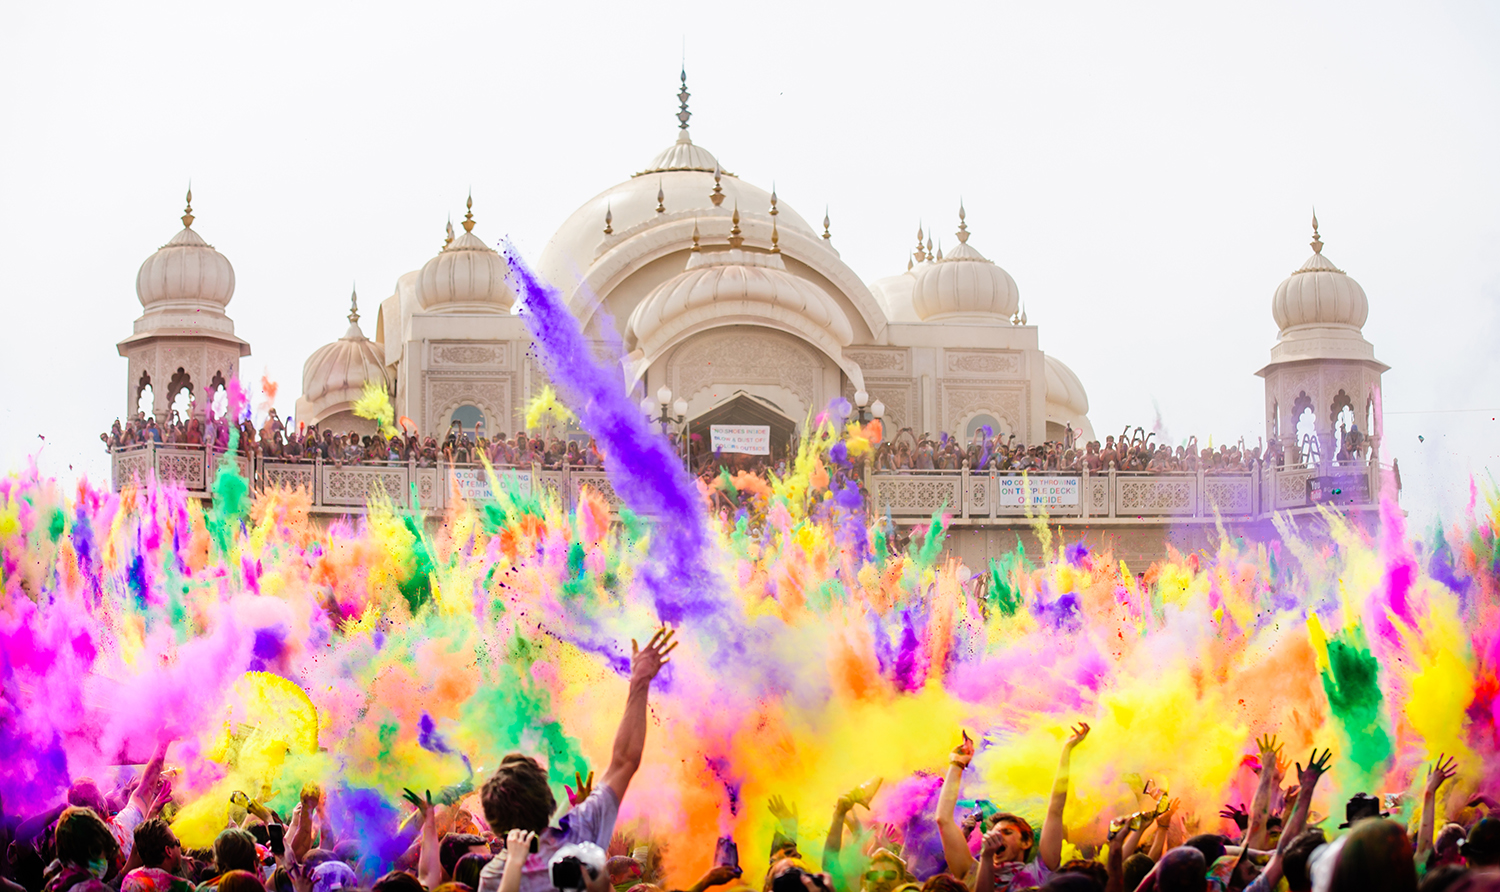 The Hindu tradition of Holi is one of the Hindu festivals that has been adopted by many Americans. The recognizable throwing of color is now found in events and festivals across the U.S. Courtesy photo